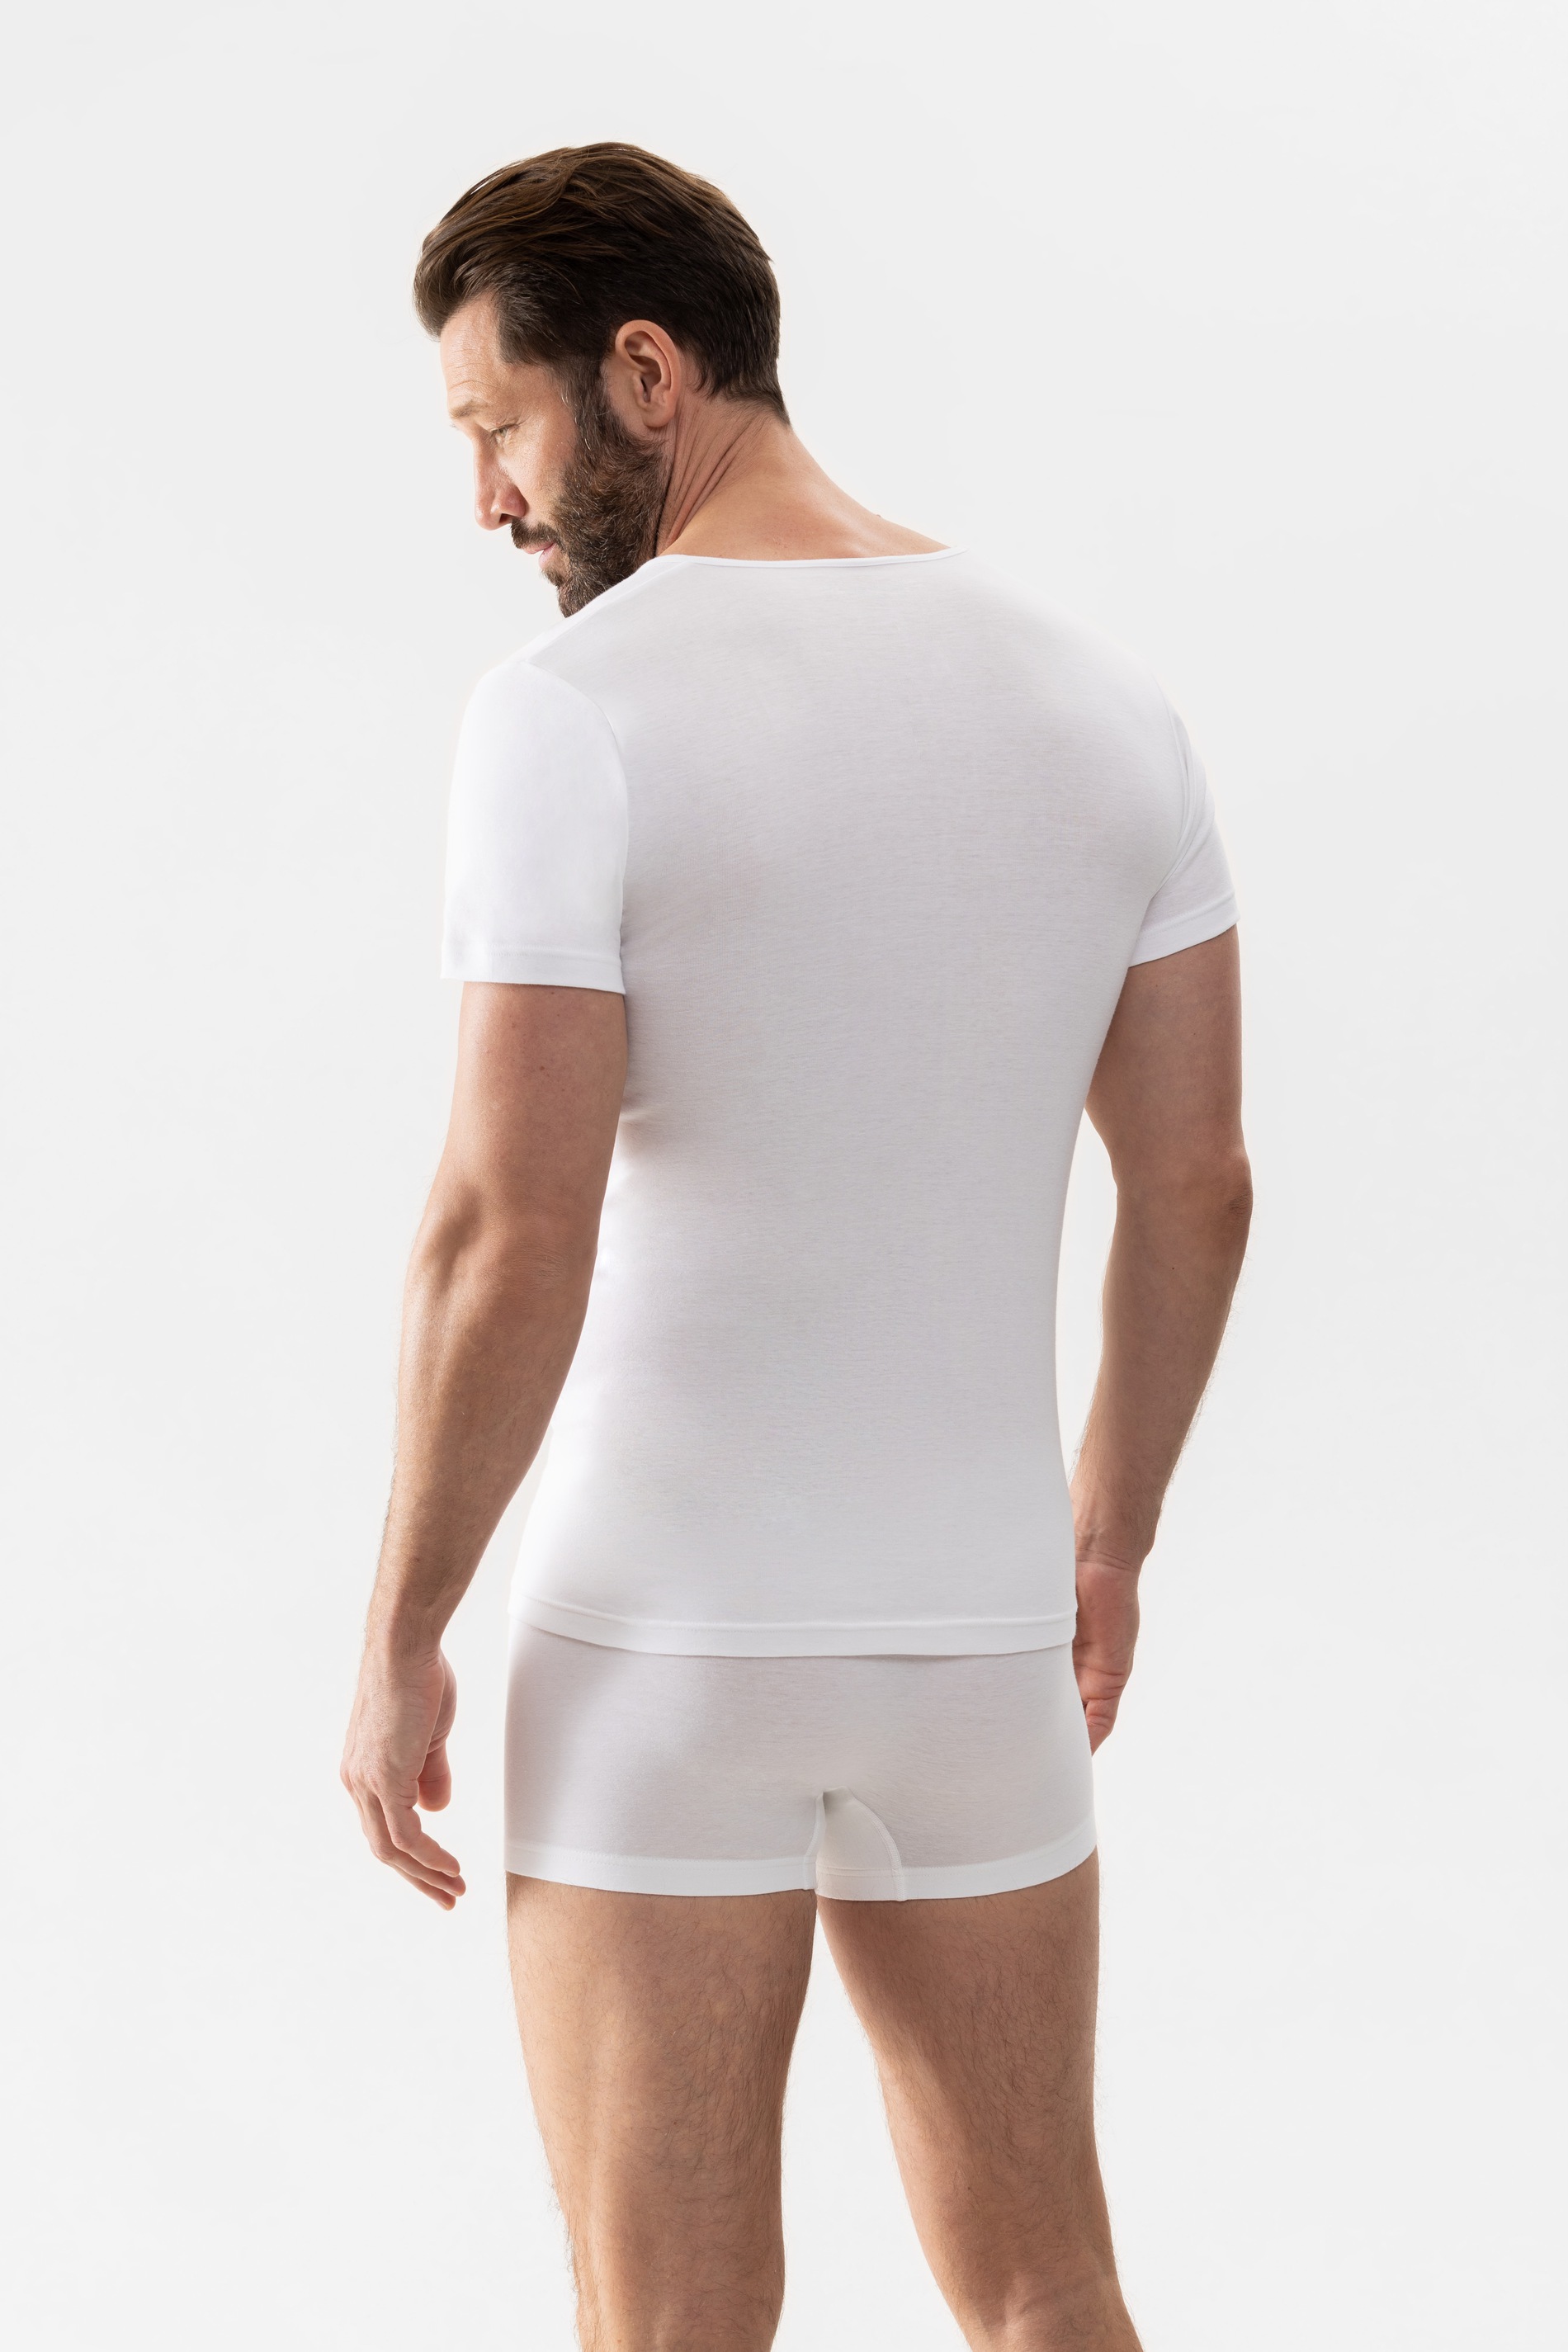 Men's shirt with round neck White Serie Casual Cotton Rear View | mey®